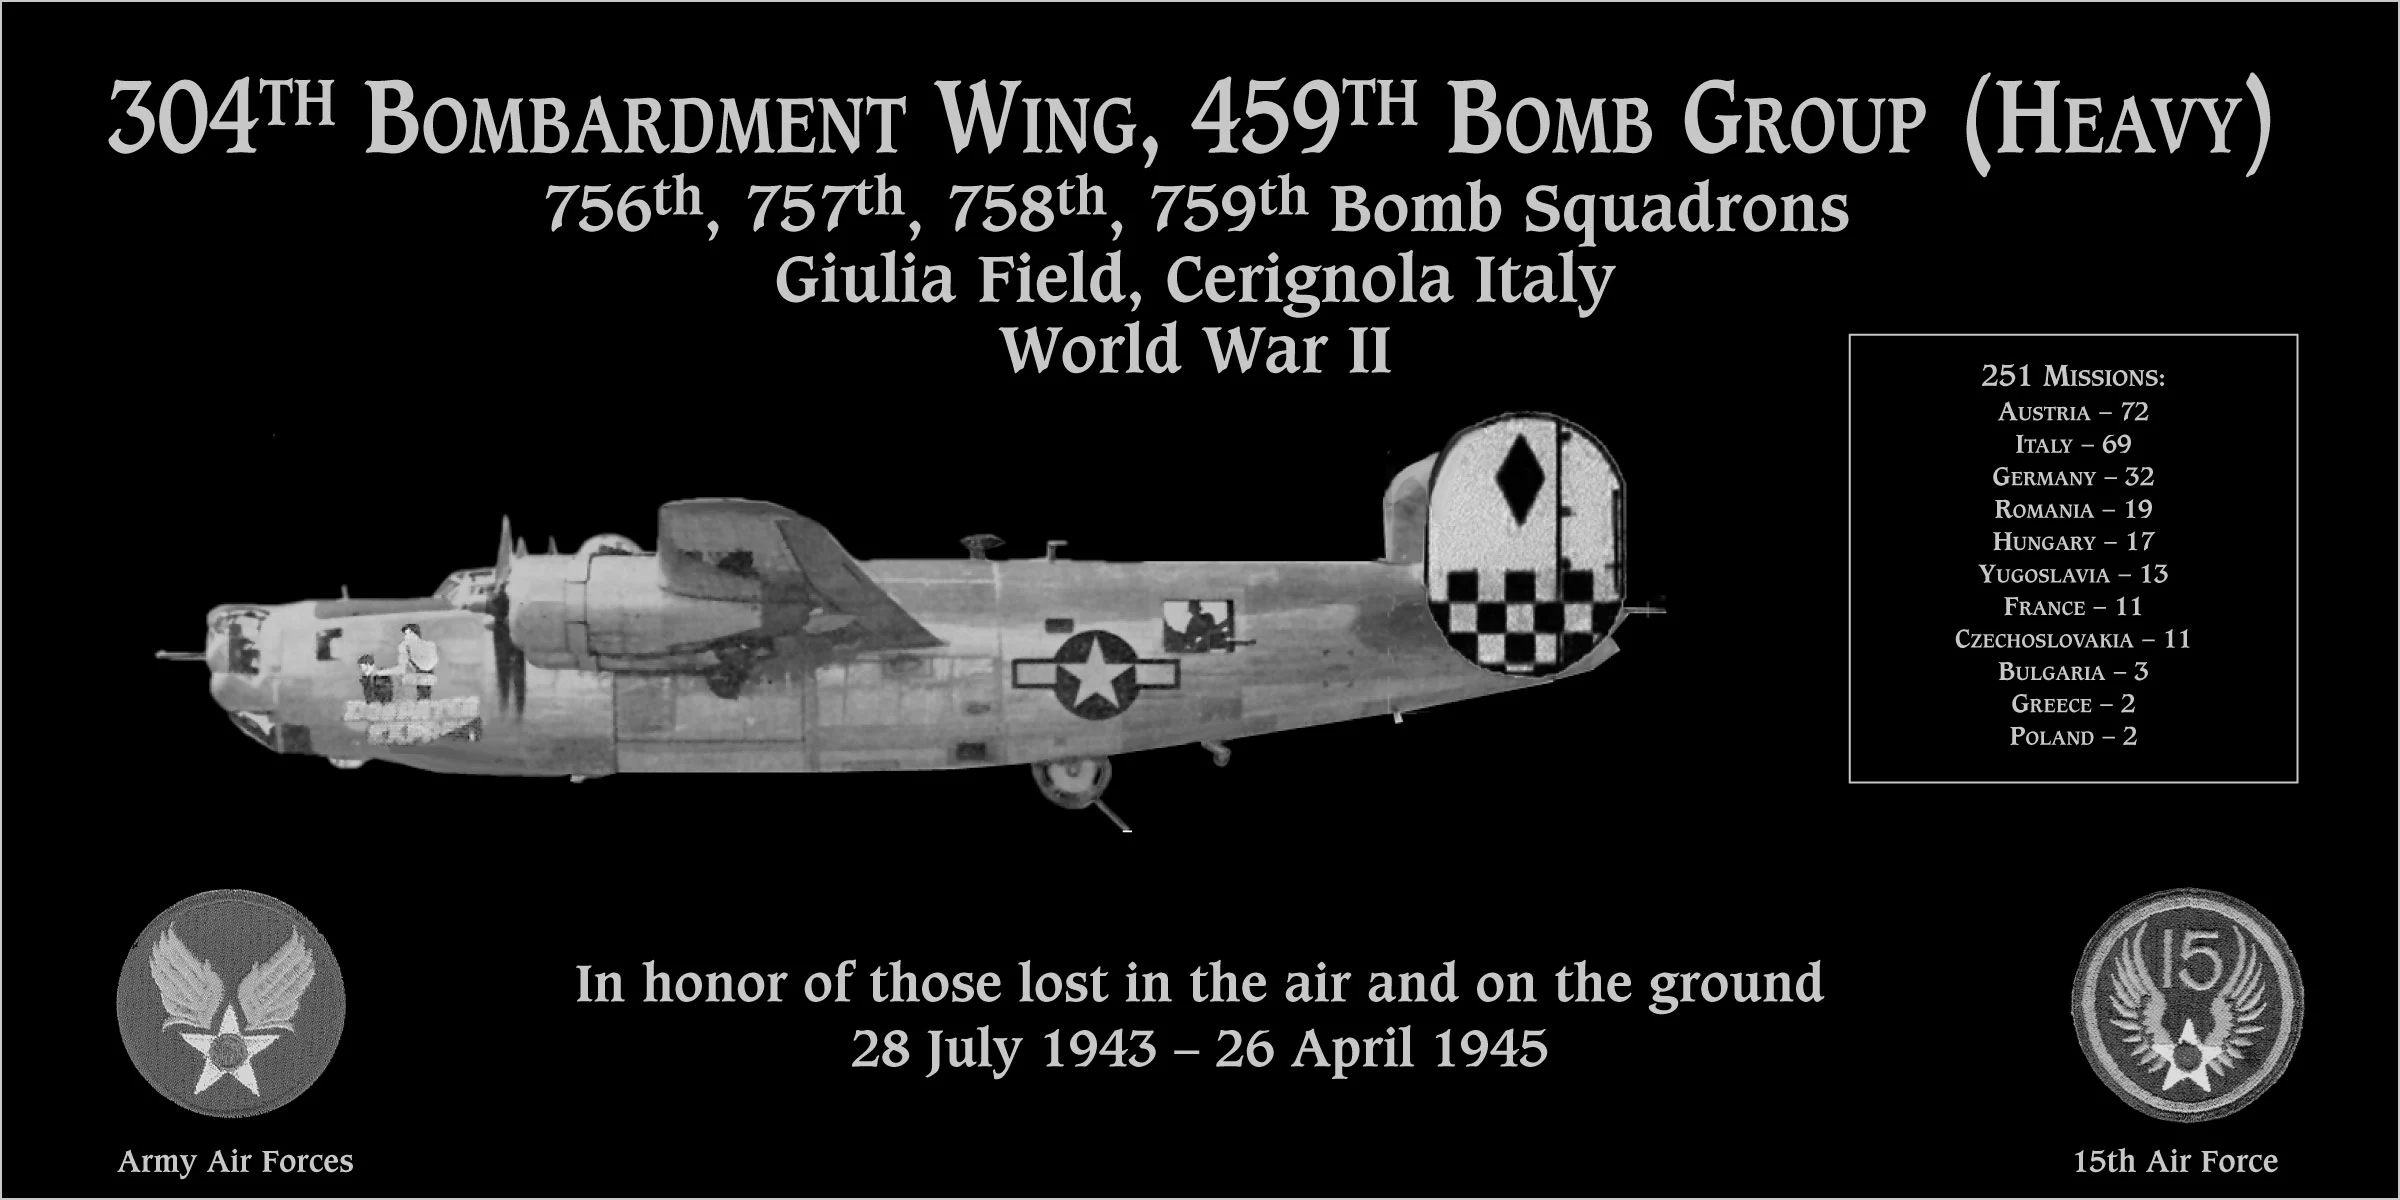 304th Bombardment Wing, 459th Bomb Group (Heavy)